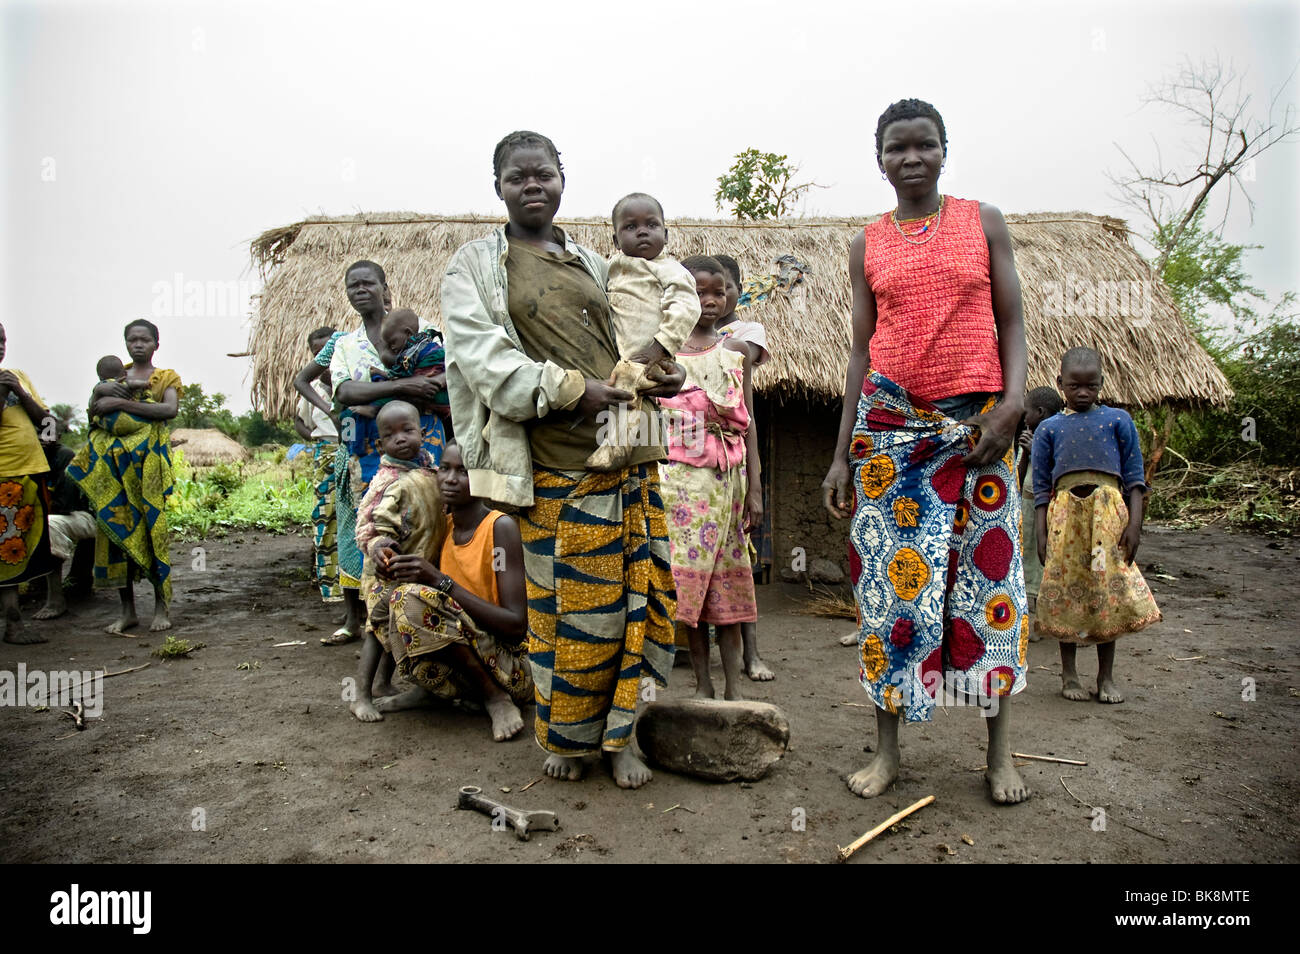 Internally displaced people who fled the LRA guerilla in Haut Uele, Northern Congo Stock Photo